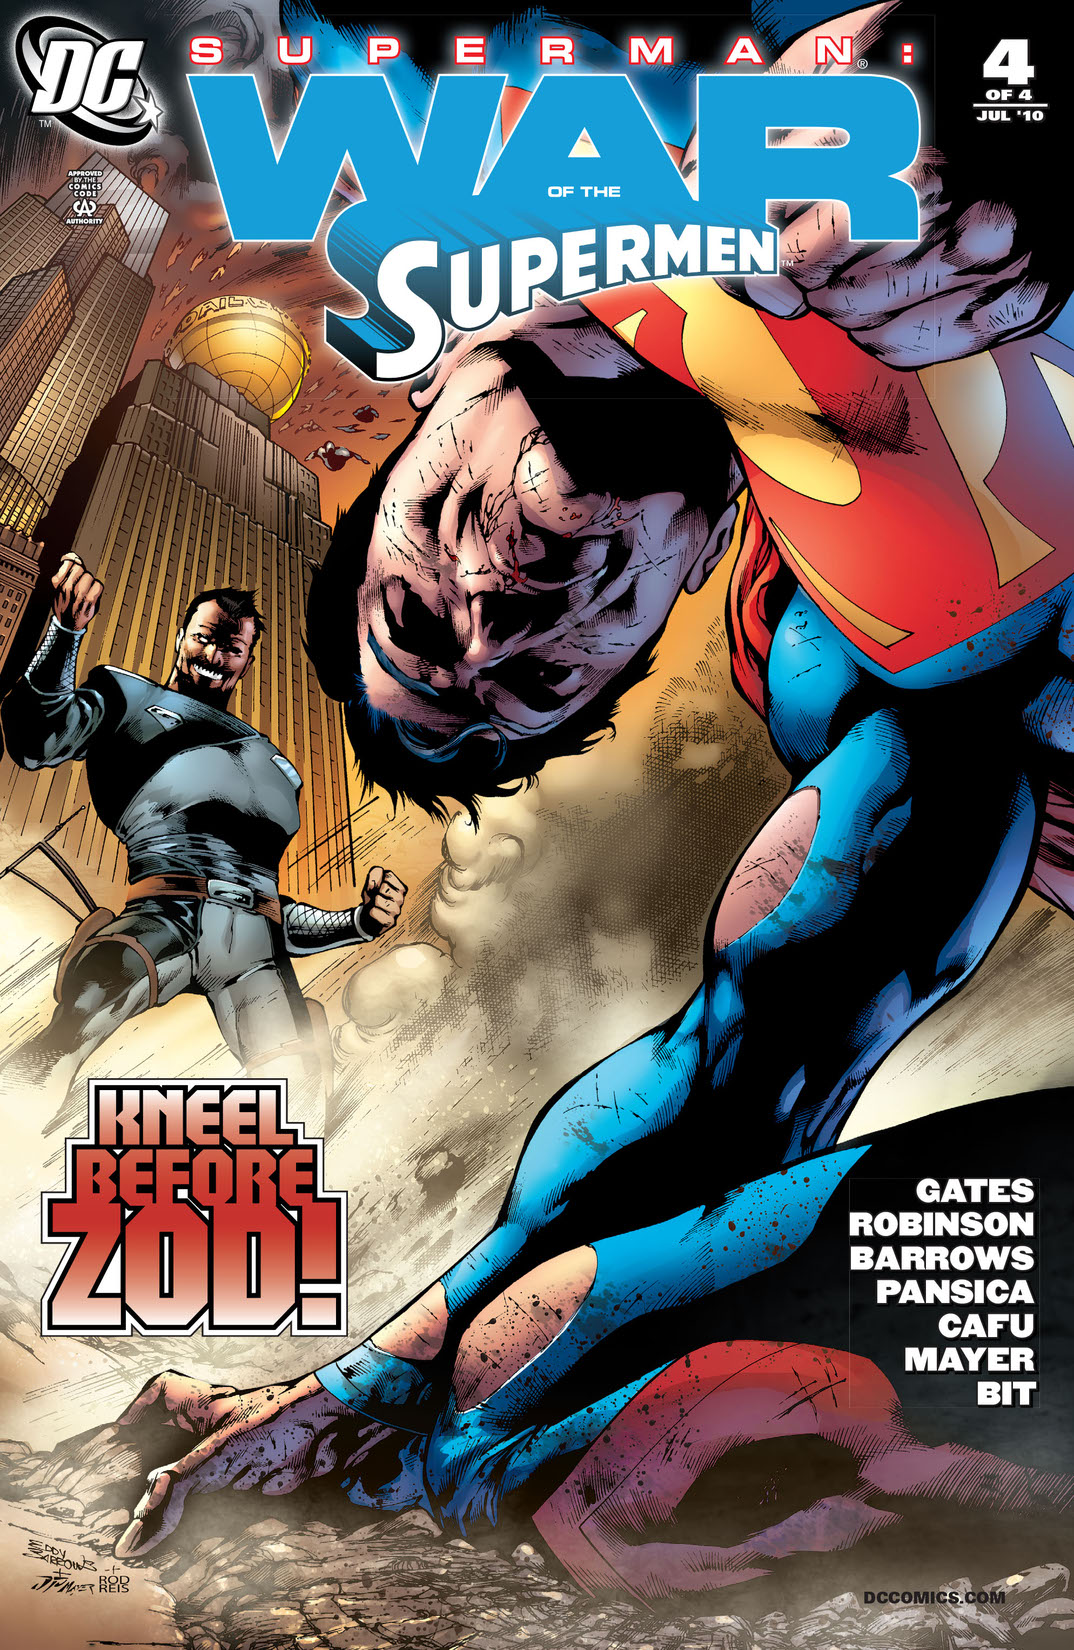 Superman: War of the Supermen #4 preview images